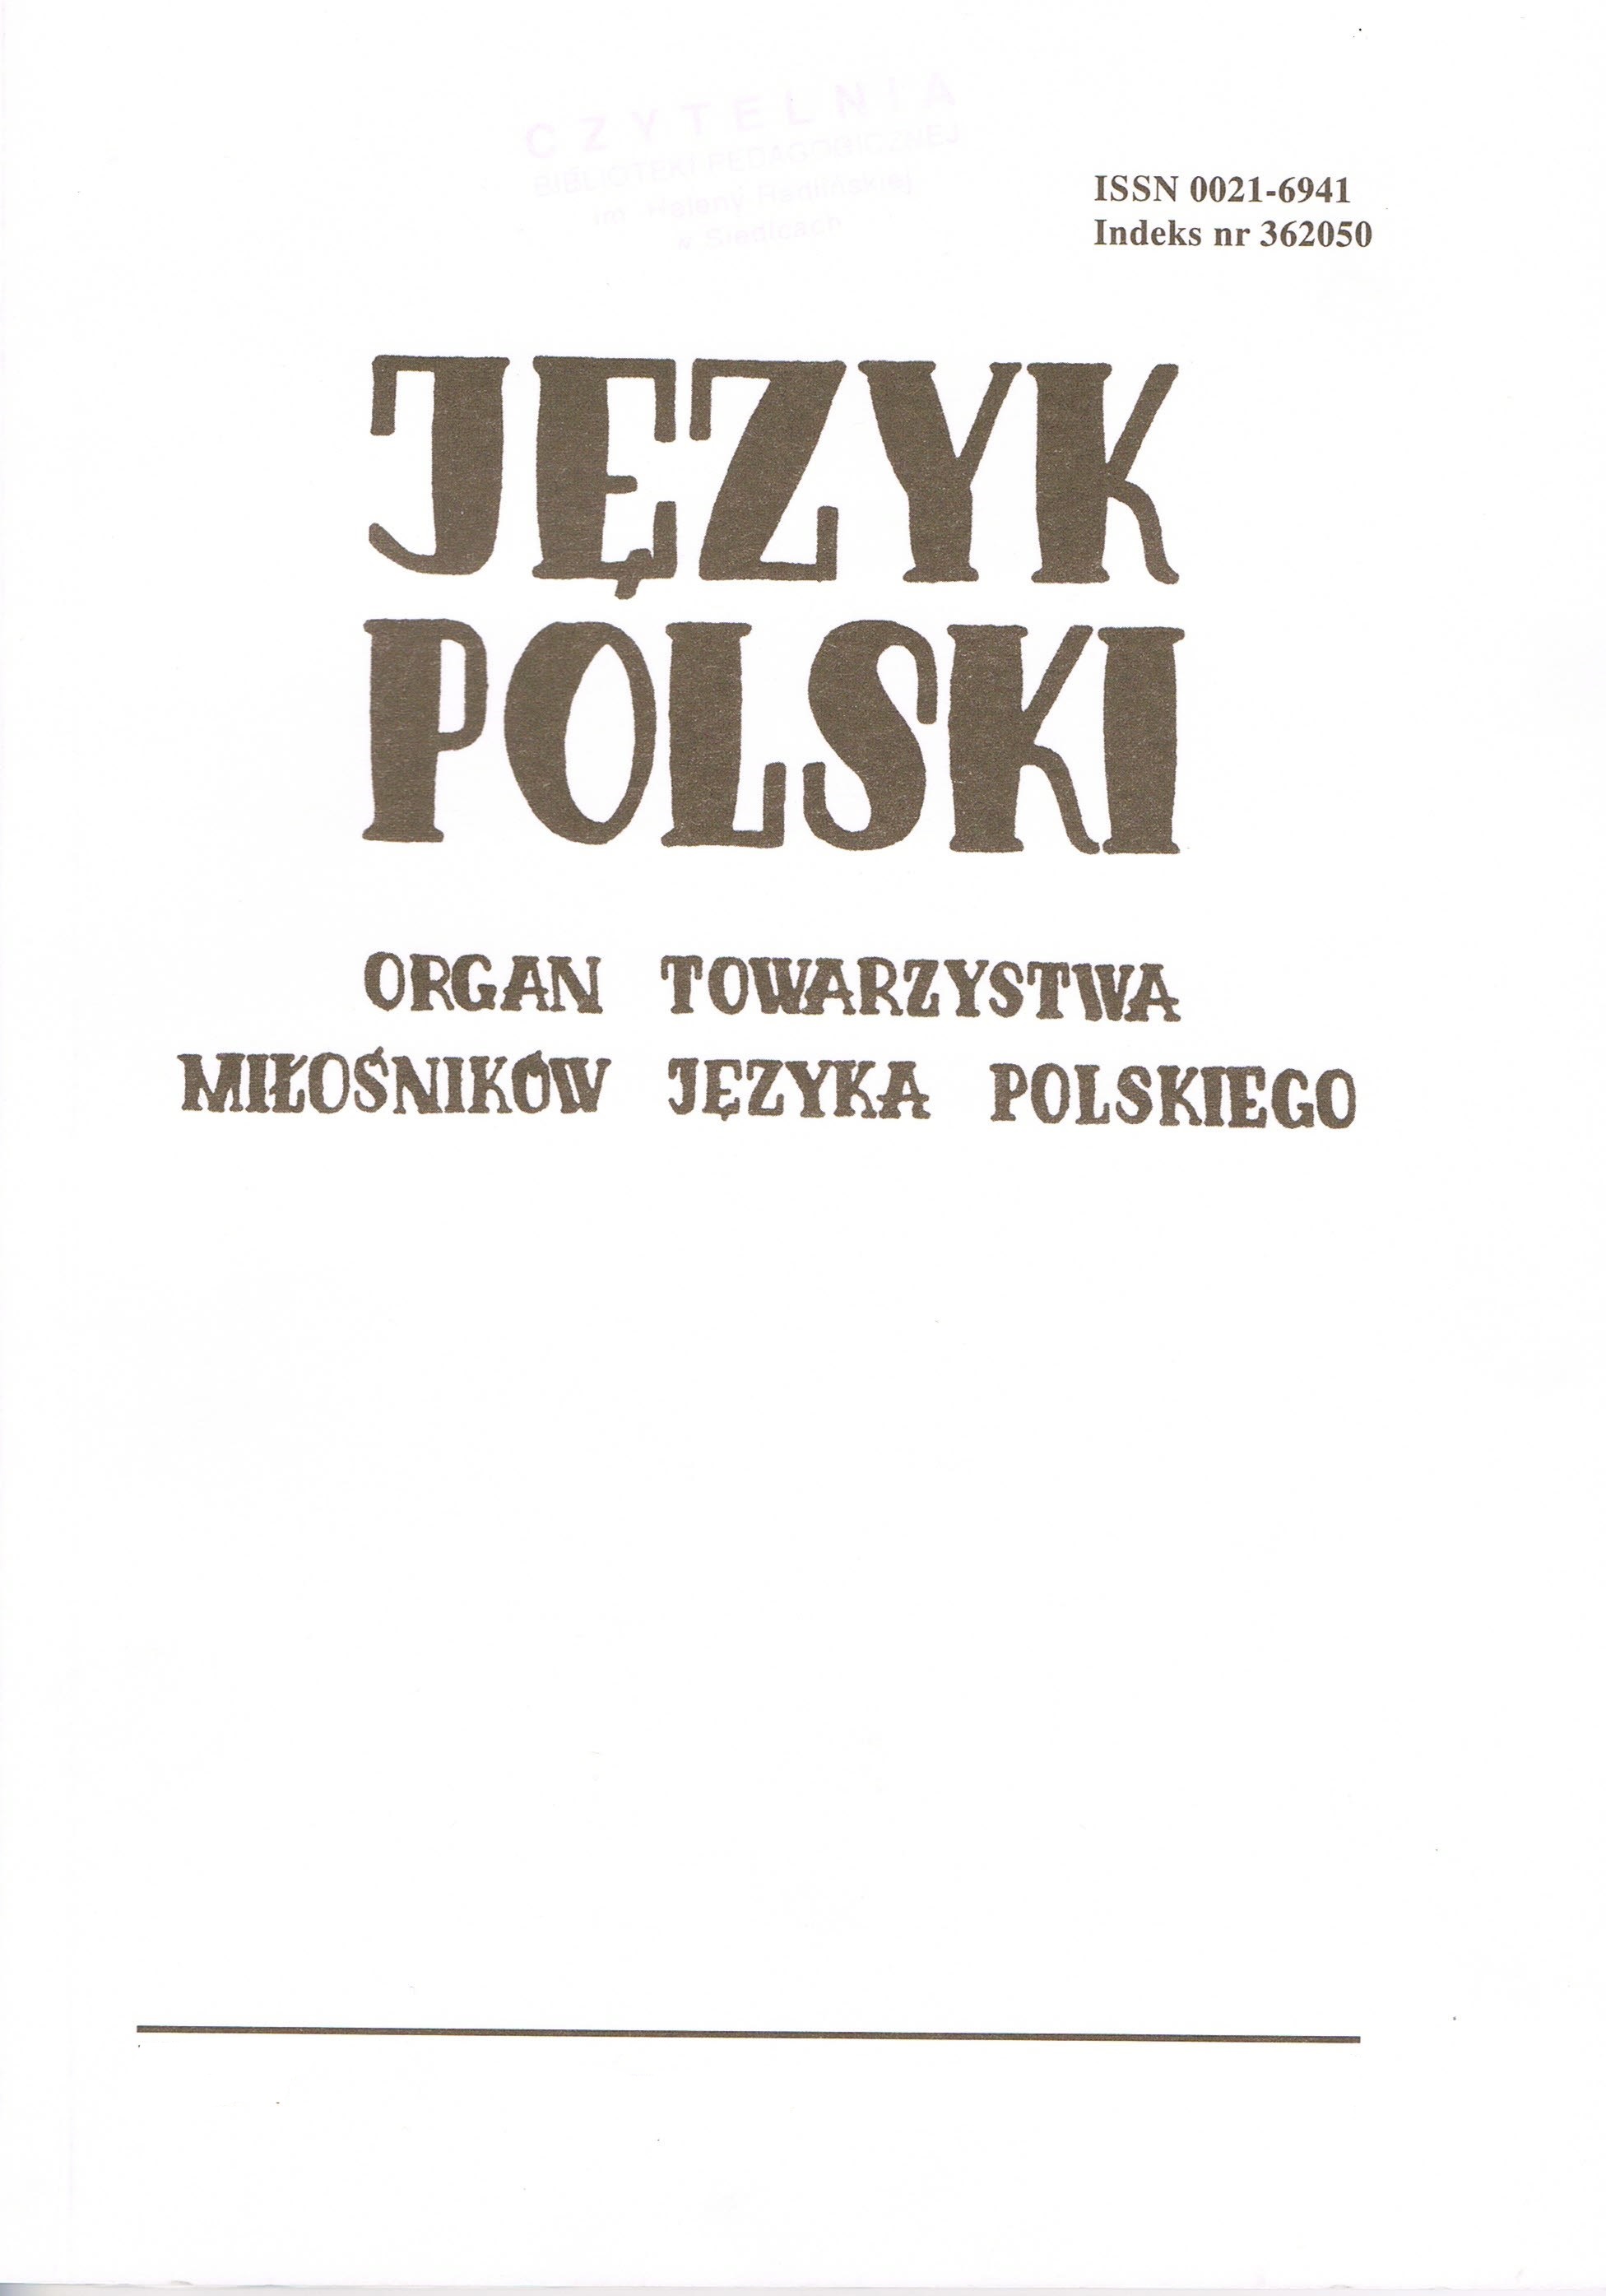 Attitude to codification and manifestation of language norm codification in journal "Język Polski" in the years 1920-1939  Cover Image